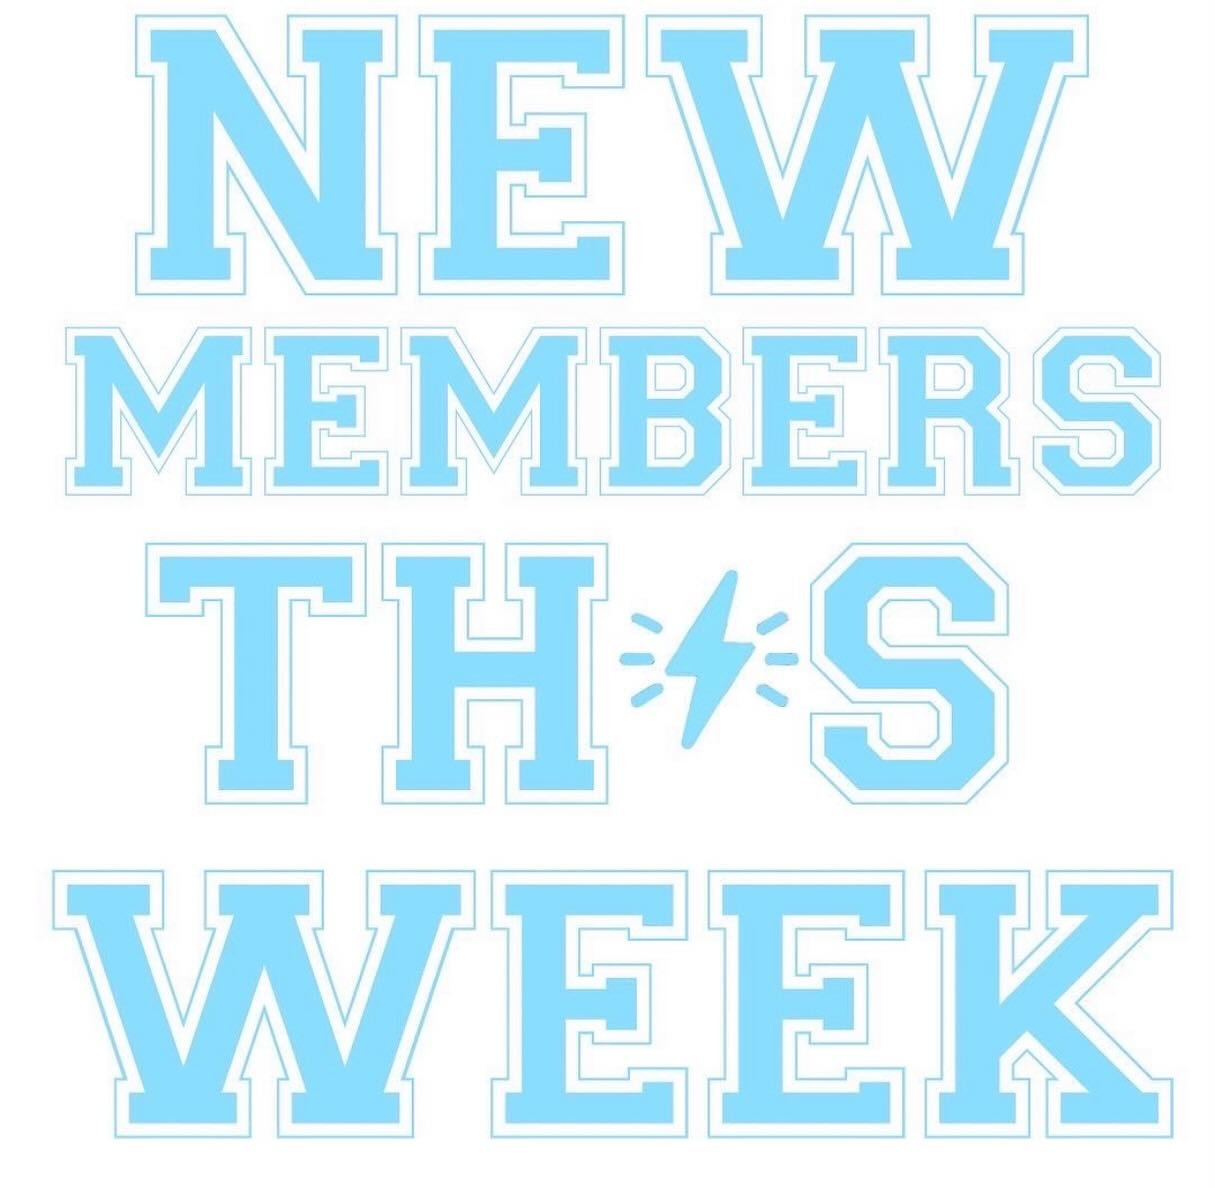 🌟🌟FITFAM FRIDAY🌟🌟
-
⬇️NEW MEMBERS⬇️
🤘Chrissy Decarolis 
🤘Brit Henderson 
🤘Nick Manning 
🤘Kirk Balcom

WELCOME TO OXFIT! 
💙💙💙💙💙💙💙
-
Another month gone and that means more amazing athletes have joined the OxFit Nation 💪 These athletes a